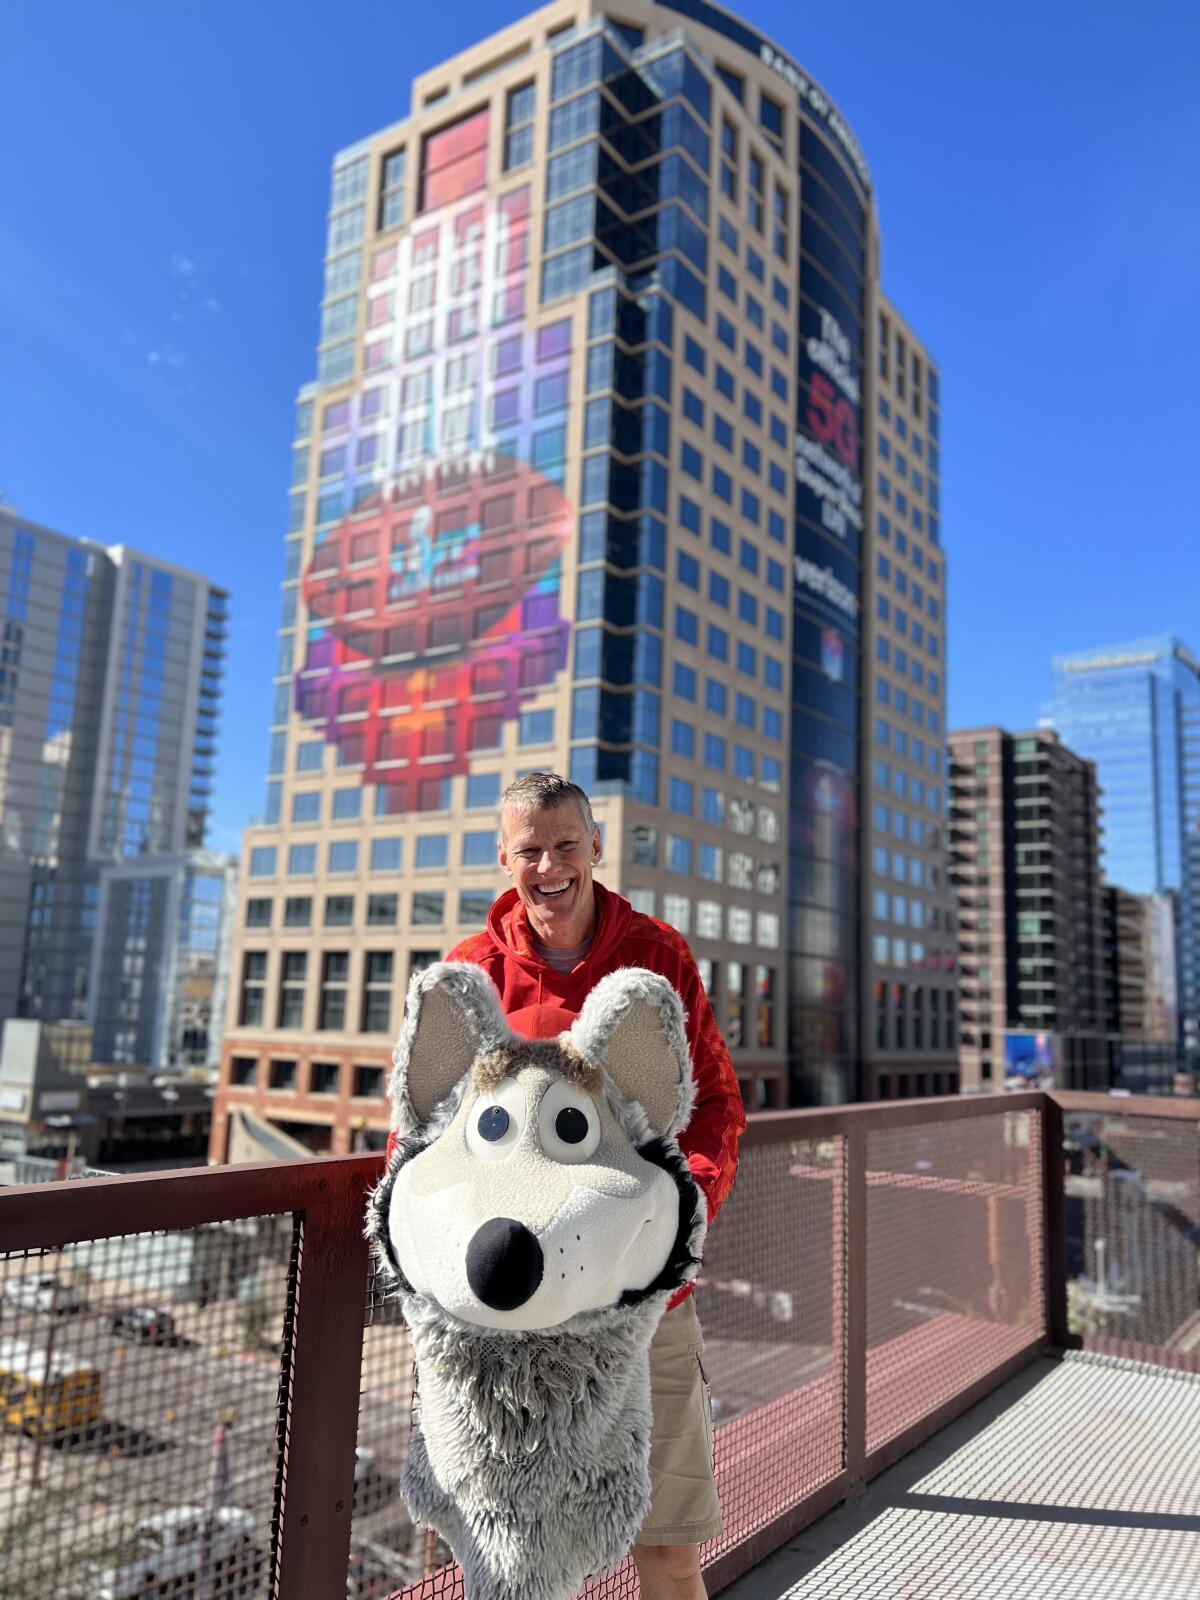 Chiefs' KC Wolf, the NFL's longest-tenured mascot, basks in first